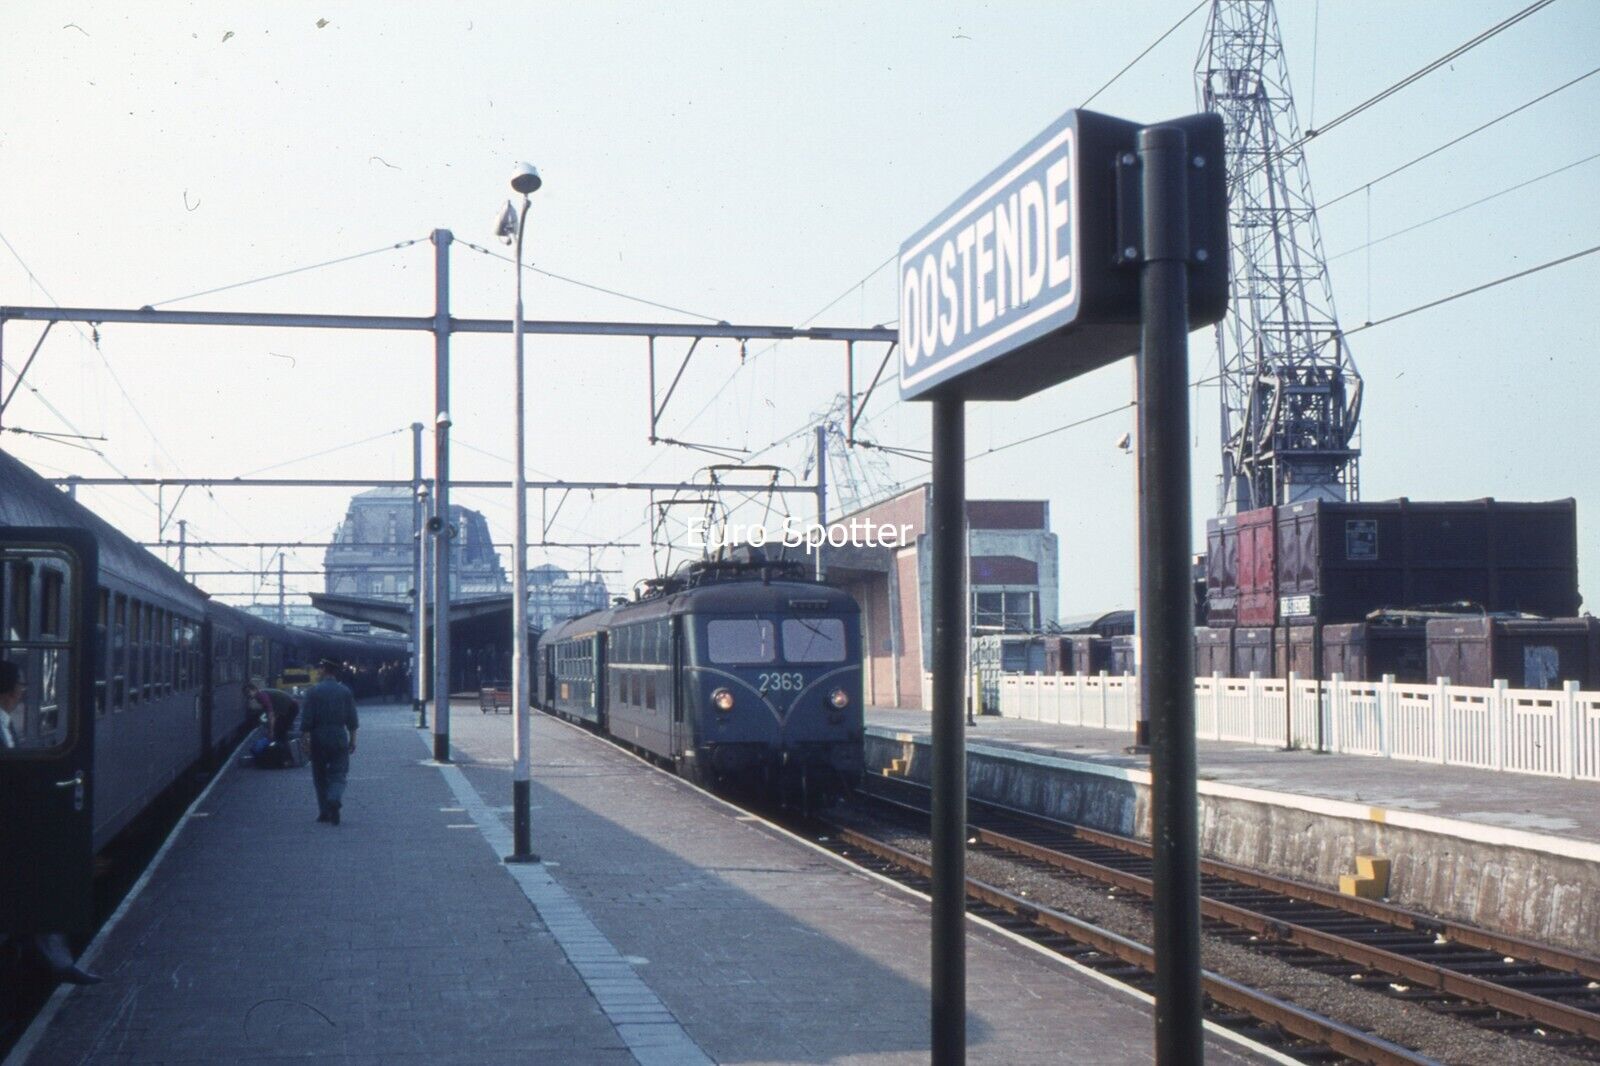 B230 35mm Slide SNCB Class 23 2363 Oostende c.1971